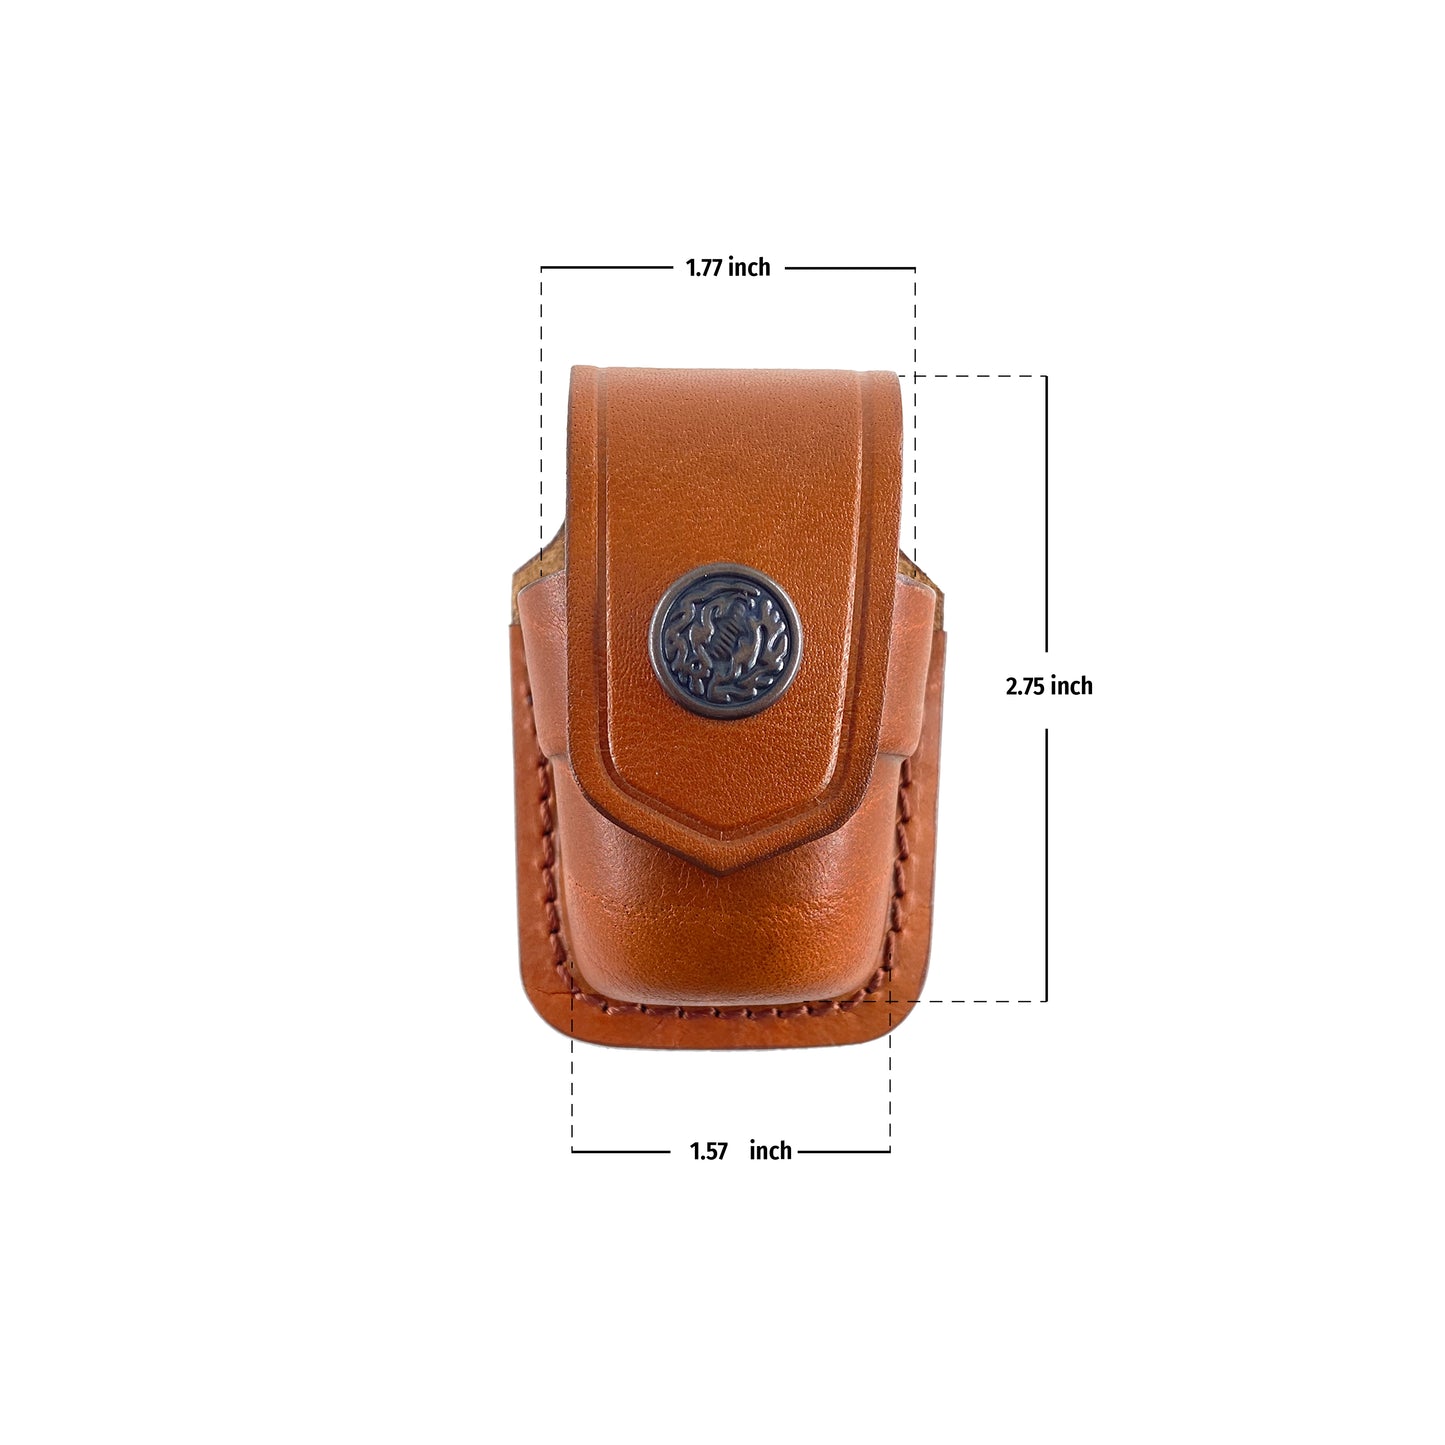 ALISM037 Handmade Leather Single Speed Loader Carrier/case/Pouch with Belt Clip for 357 Magnum 6 & 7 Shots, 44 Magnum 5 Shot, S&W .38 Special